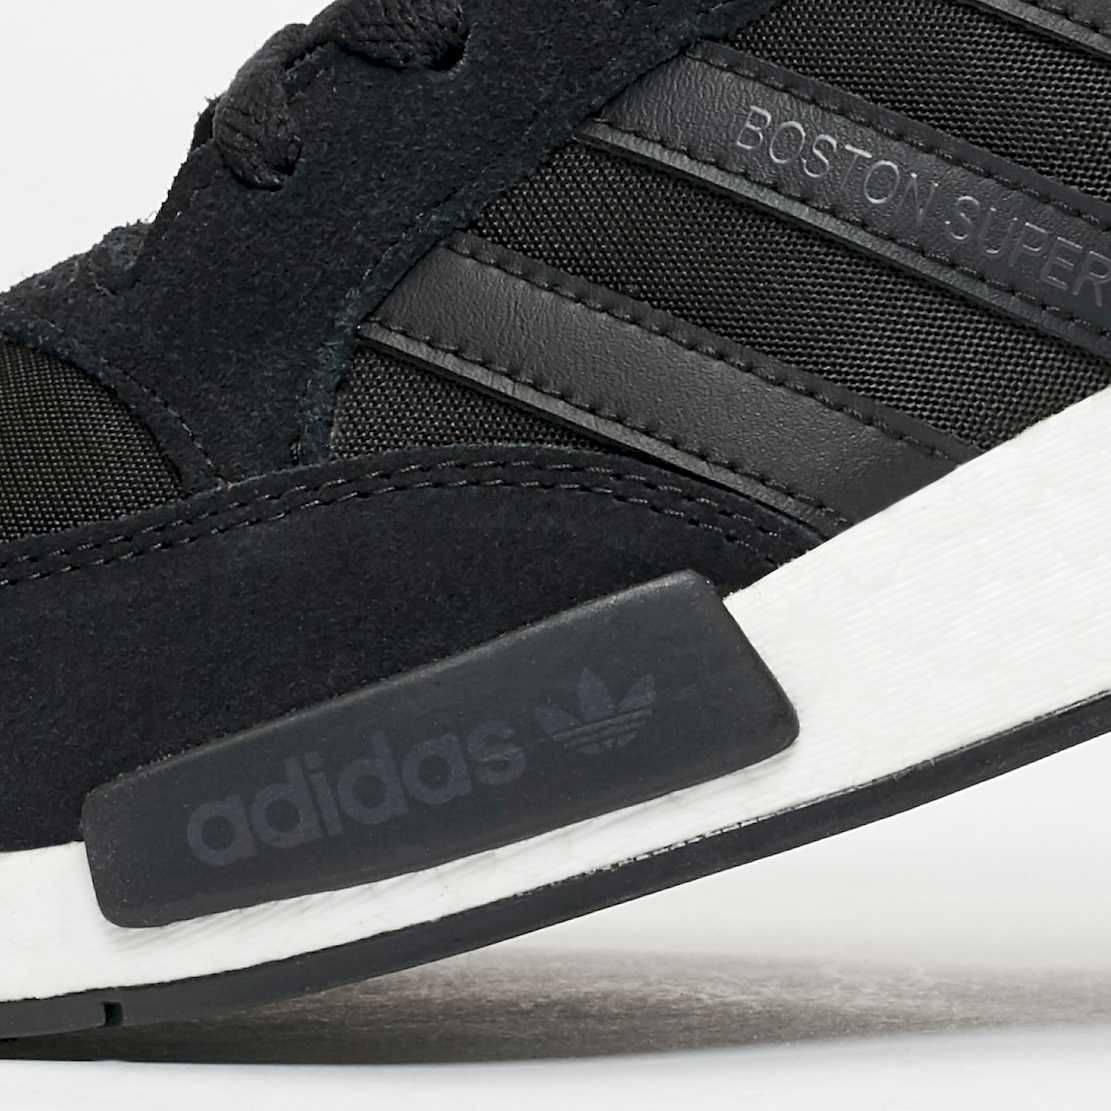 Limited! Buty Adidas Originals Boston Never Made Pack Black  boost nmd